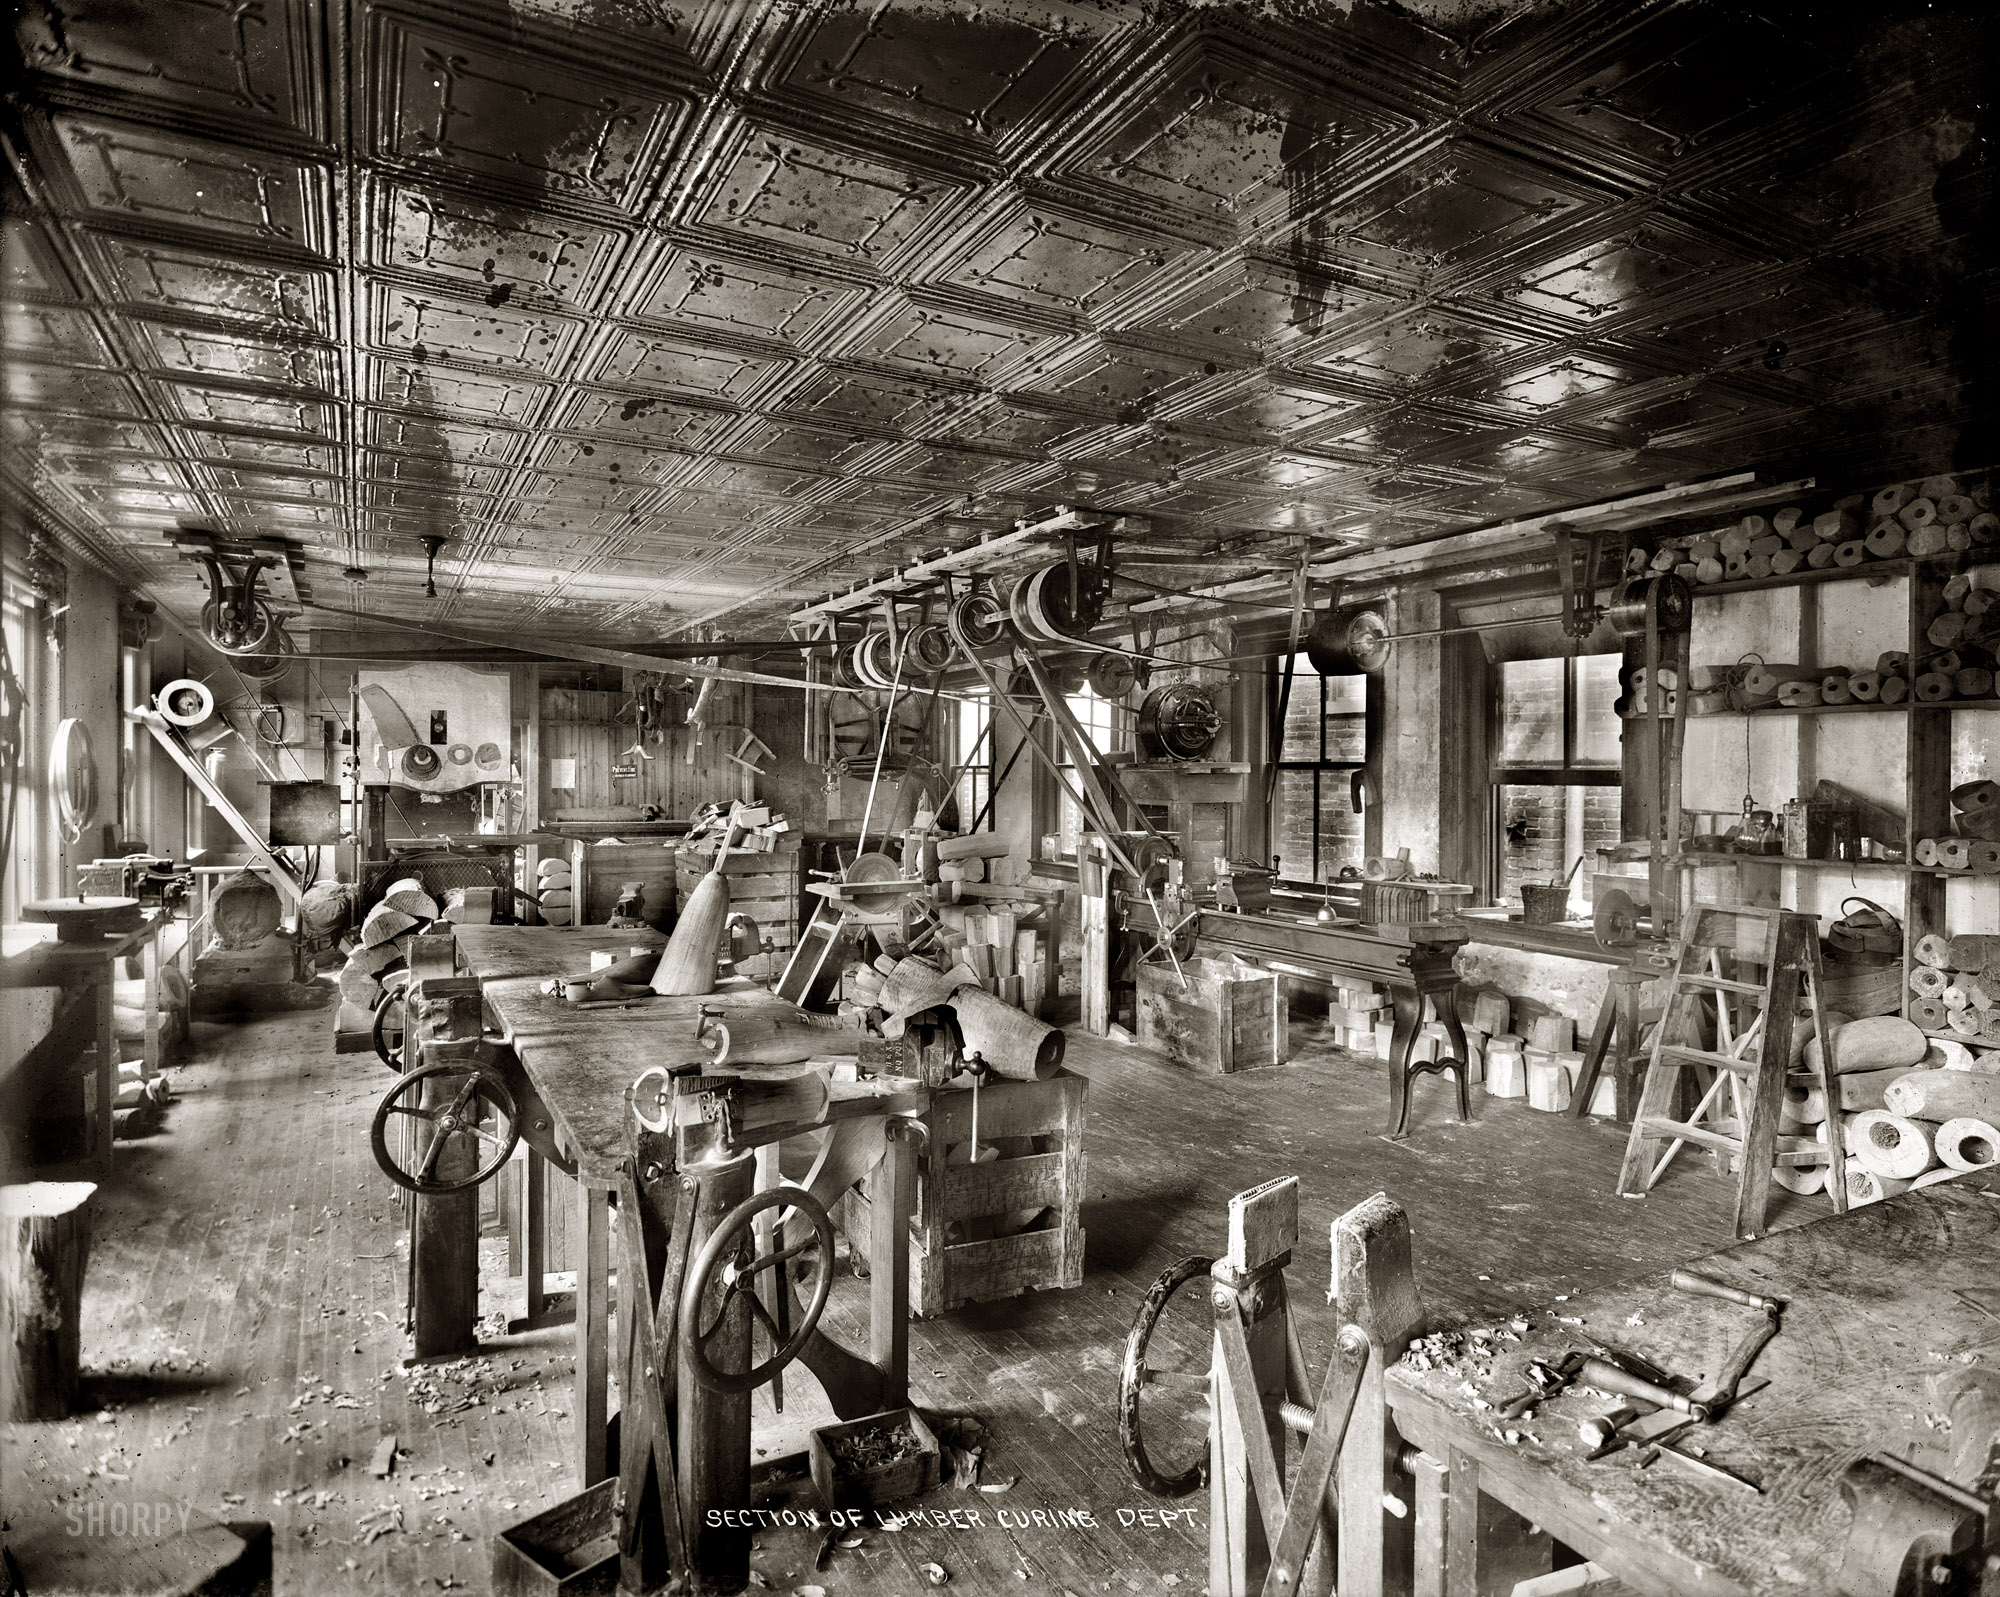 Circa 1916. "Section of lumber curing department." The raw materials for making wooden legs at what might be the Pittsburgh workshops of J.E. Hanger Artificial Limb Co. National Photo Company Collection glass negative. View full size.